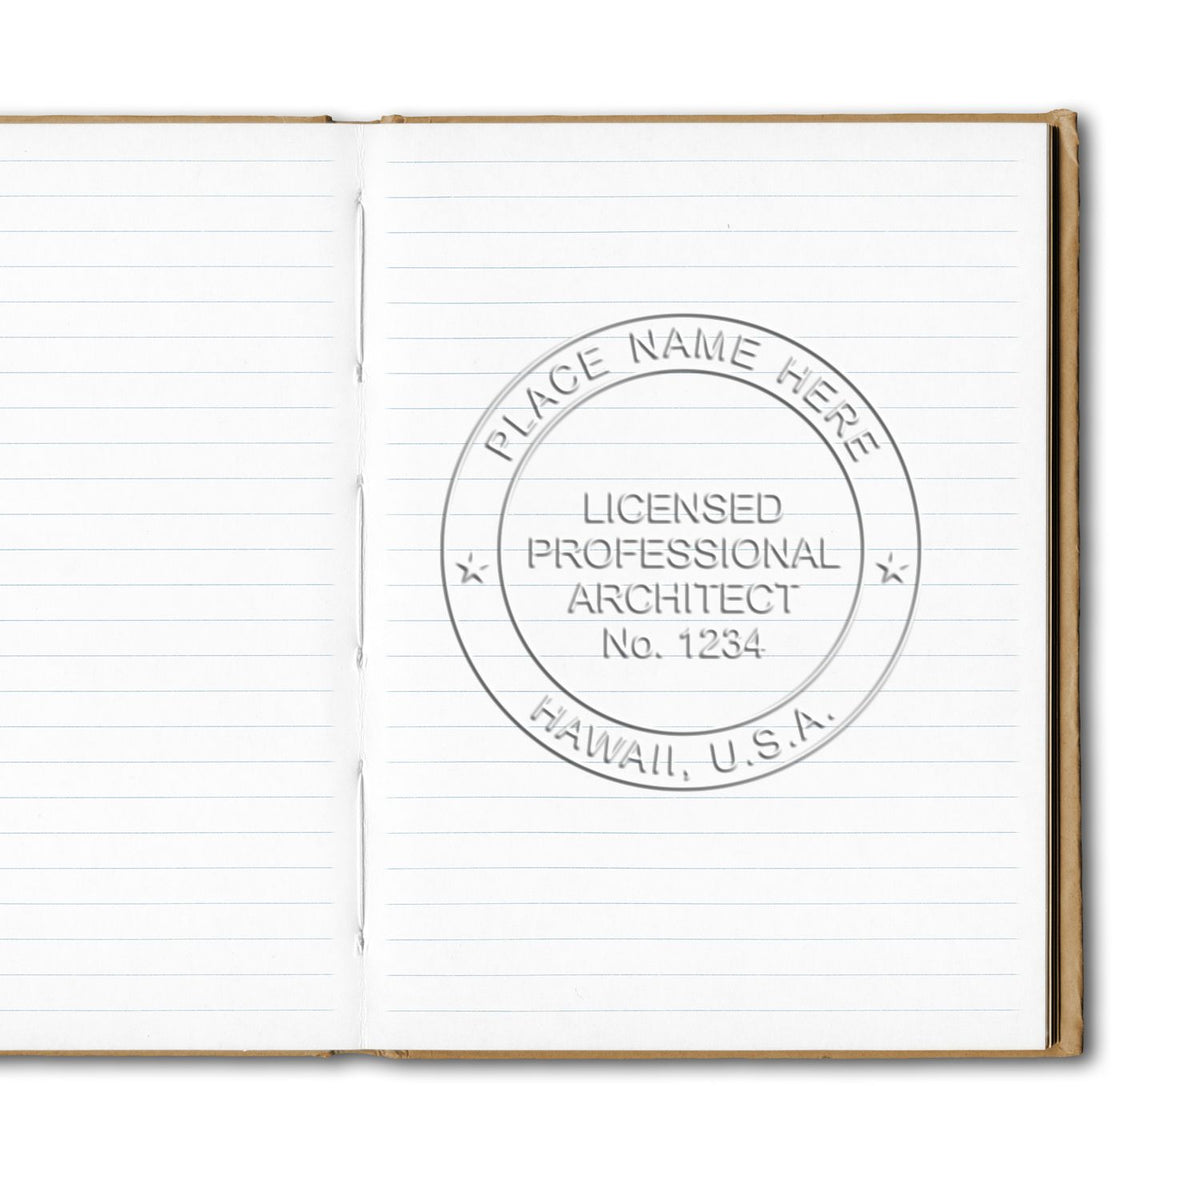 The Hawaii Desk Architect Embossing Seal stamp impression comes to life with a crisp, detailed photo on paper - showcasing true professional quality.